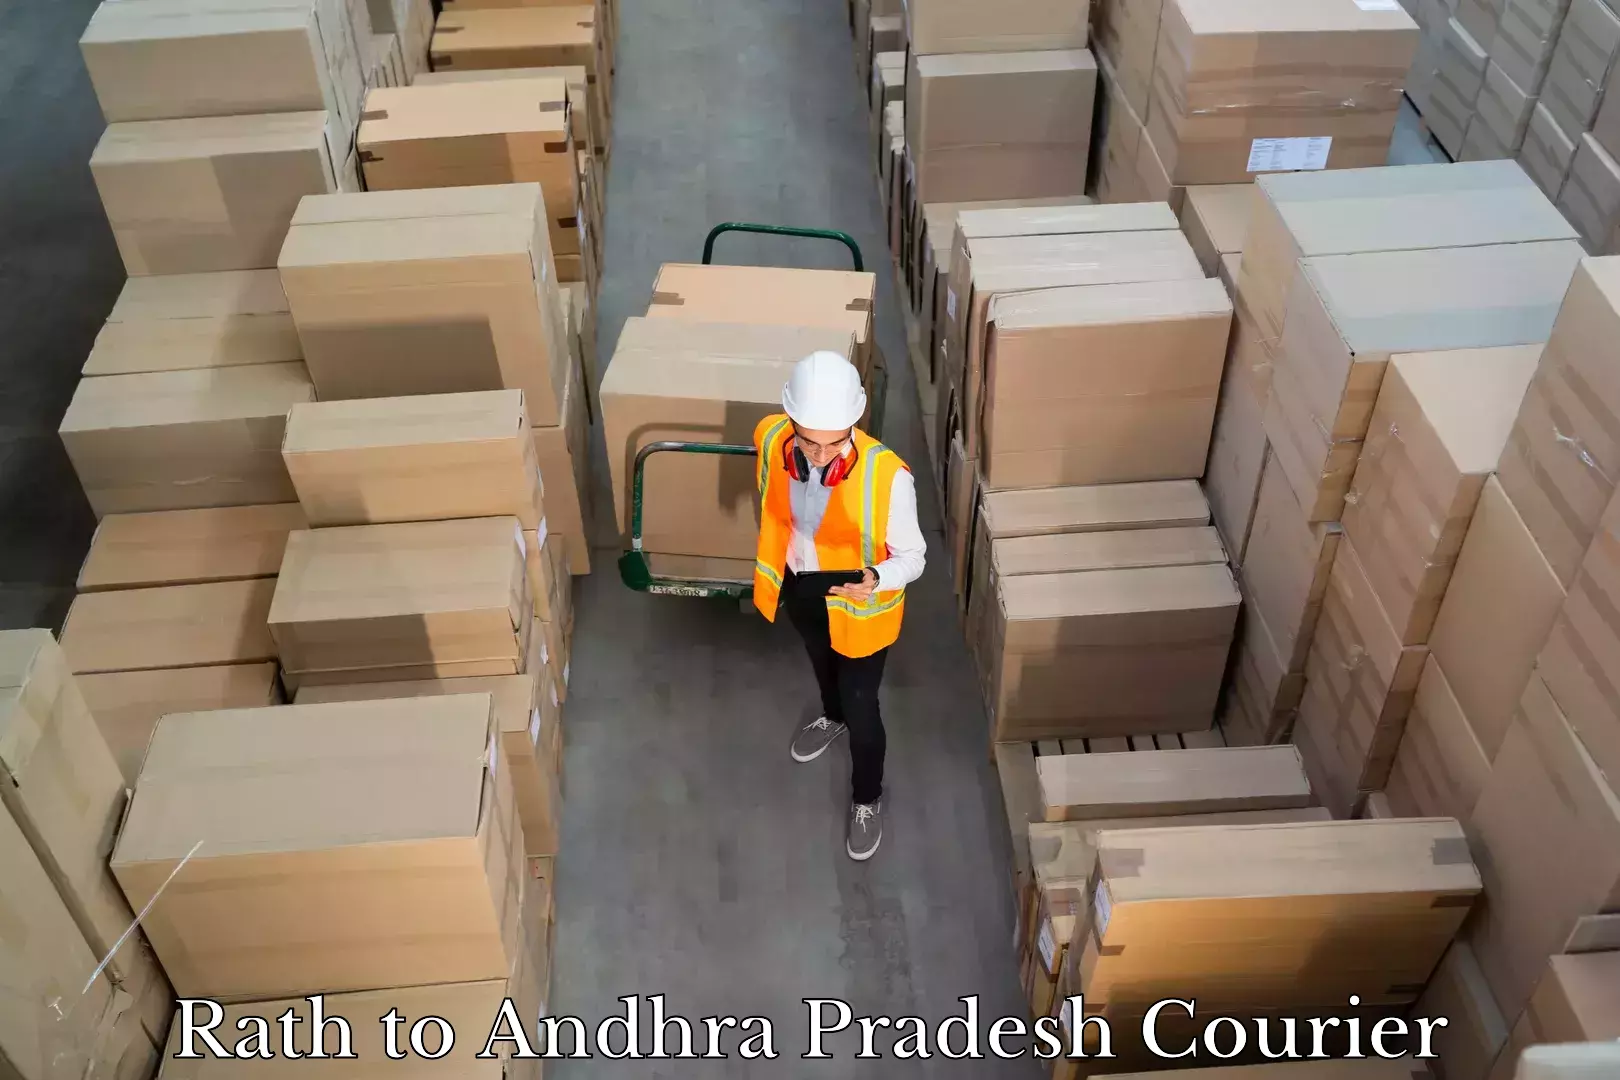 Luggage shipping specialists Rath to Andhra Pradesh